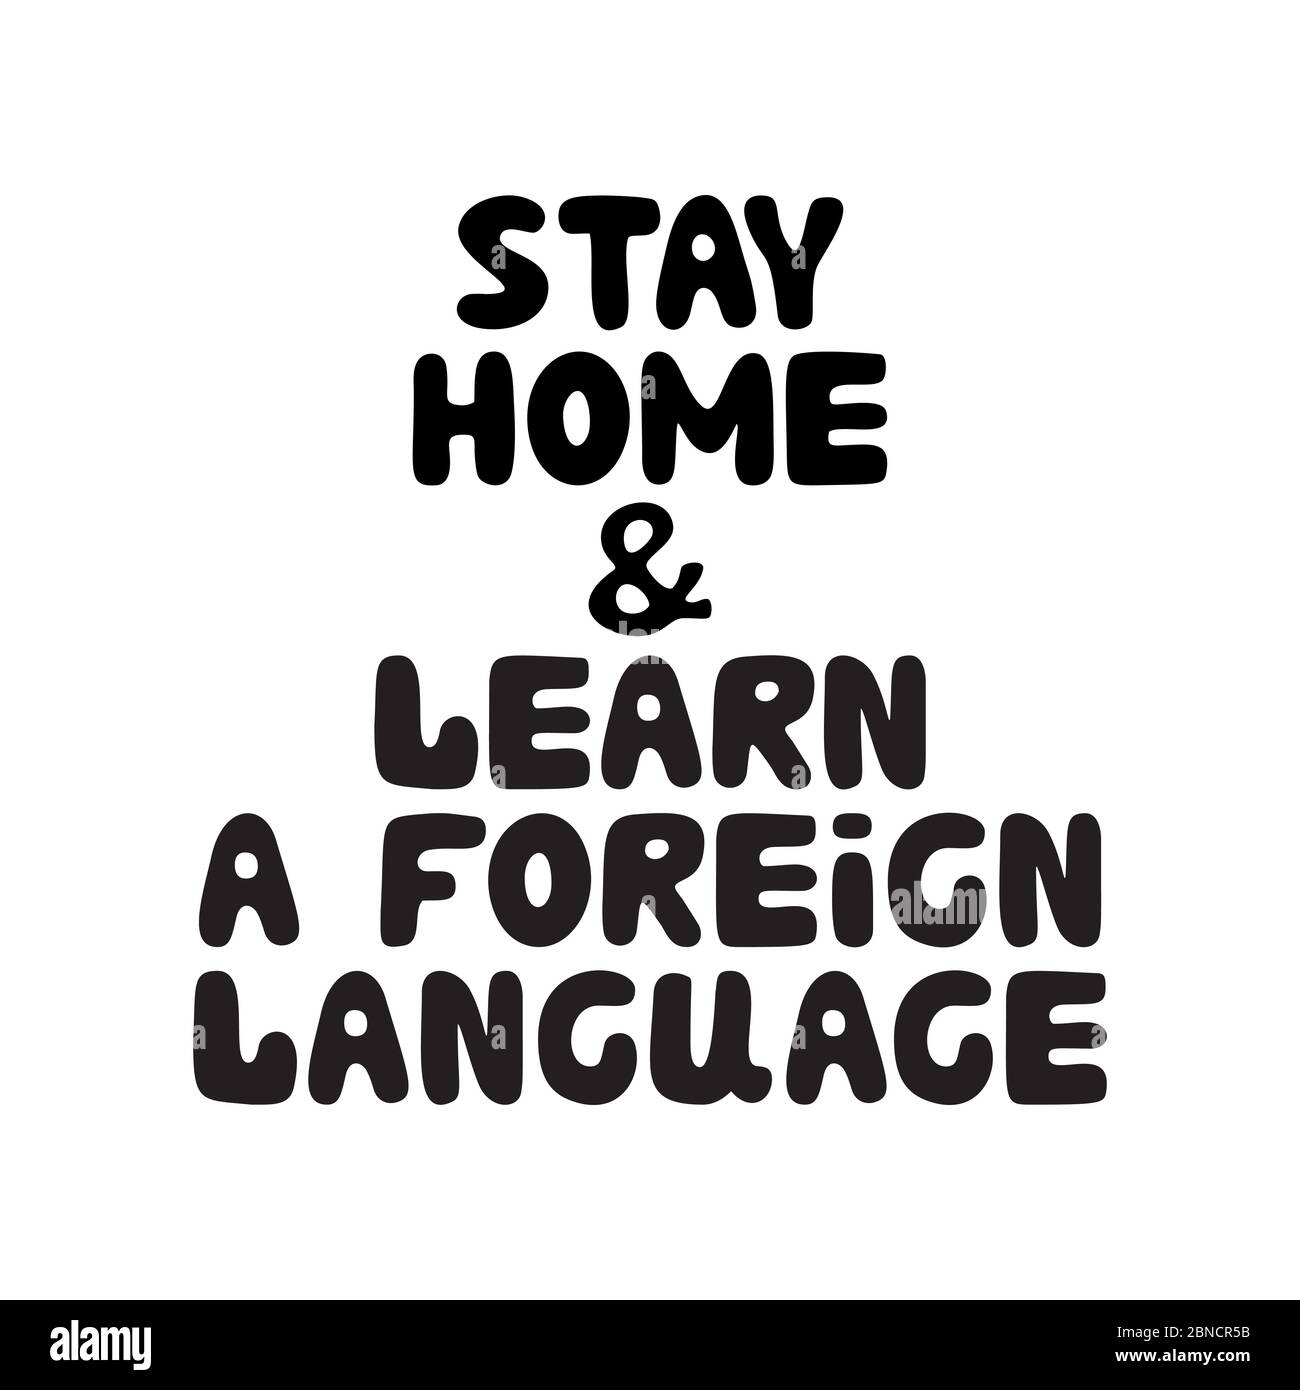 Stay home and learn a foreign language. Cute hand drawn doodle bubble lettering. Isolated on white background. Vector stock illustration. Stock Vector